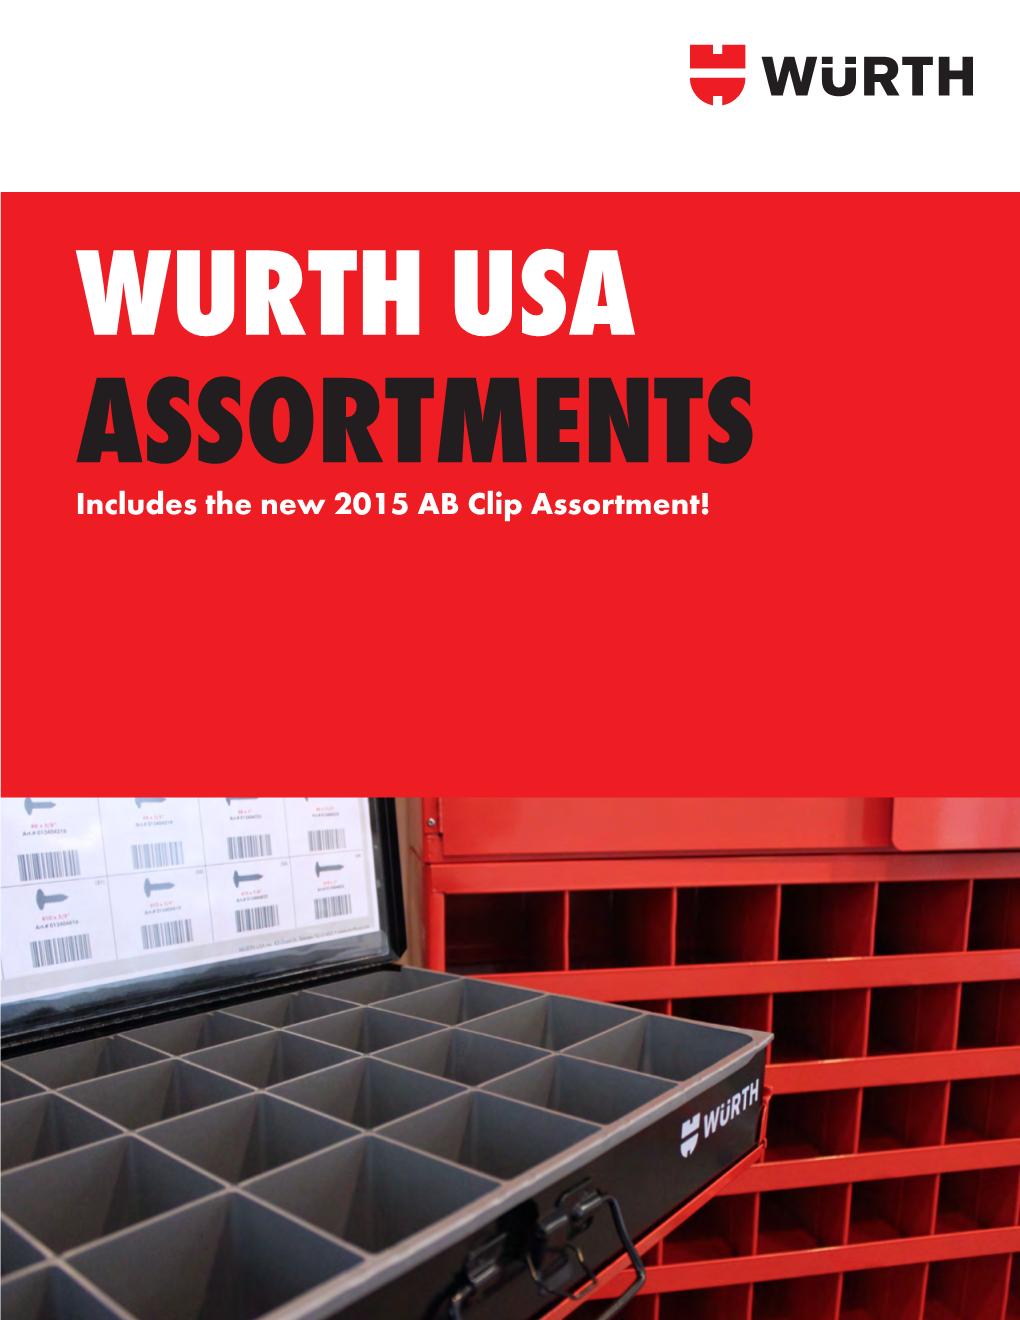 Includes the New 2015 AB Clip Assortment! © 2013 Wurth USA, Inc